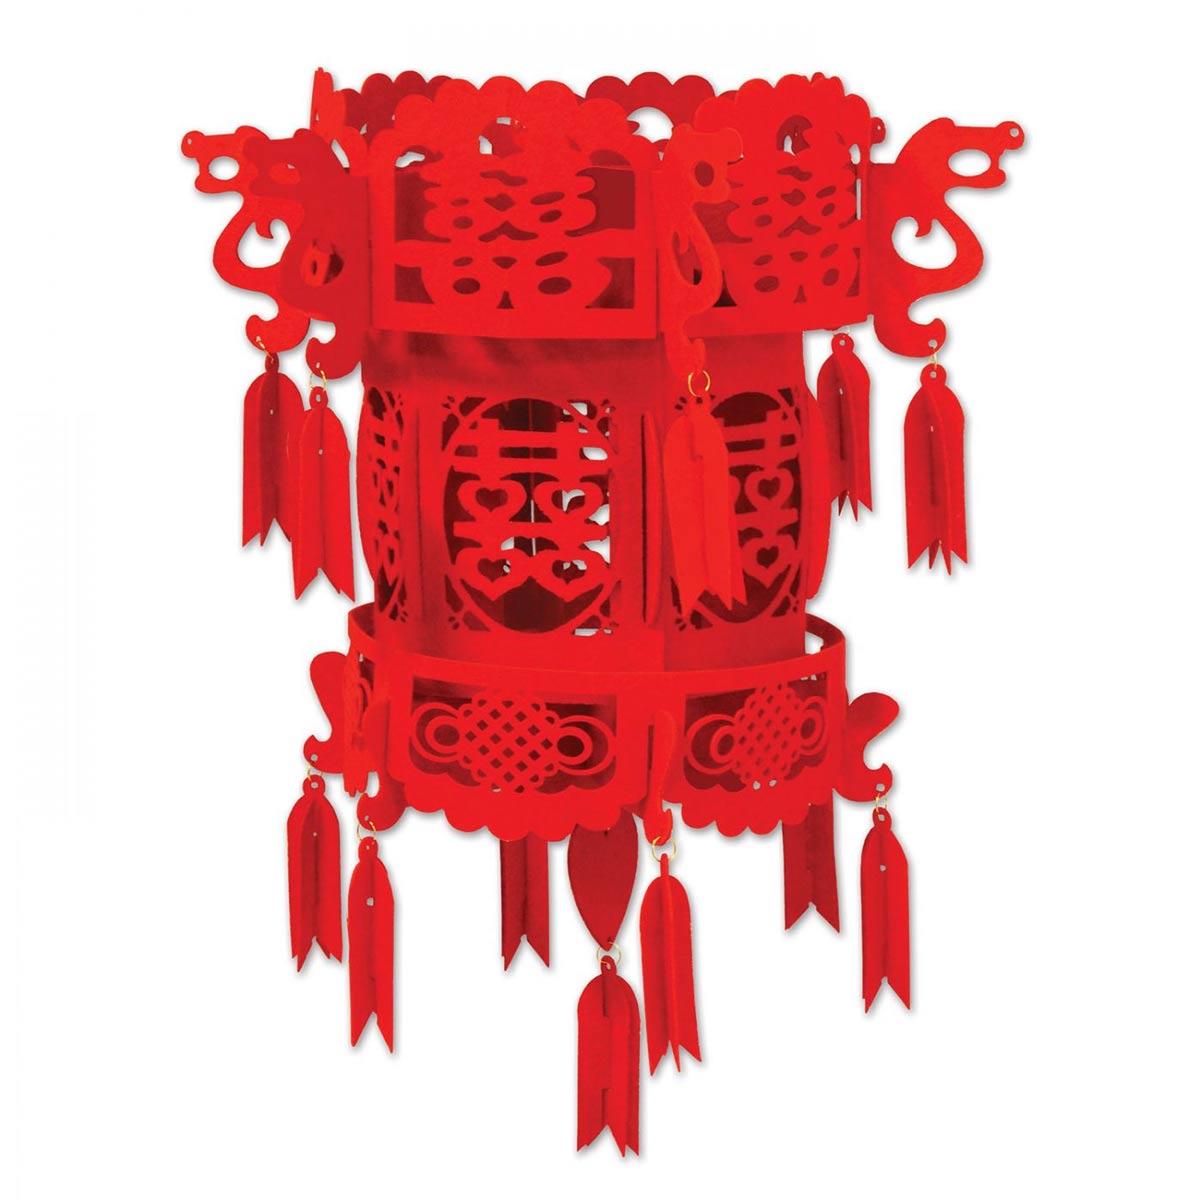 Deluxe Chinese Palace Felt 18" Hanging Decoration by Beistle 59995 available here at Karnival Costumes online party shop